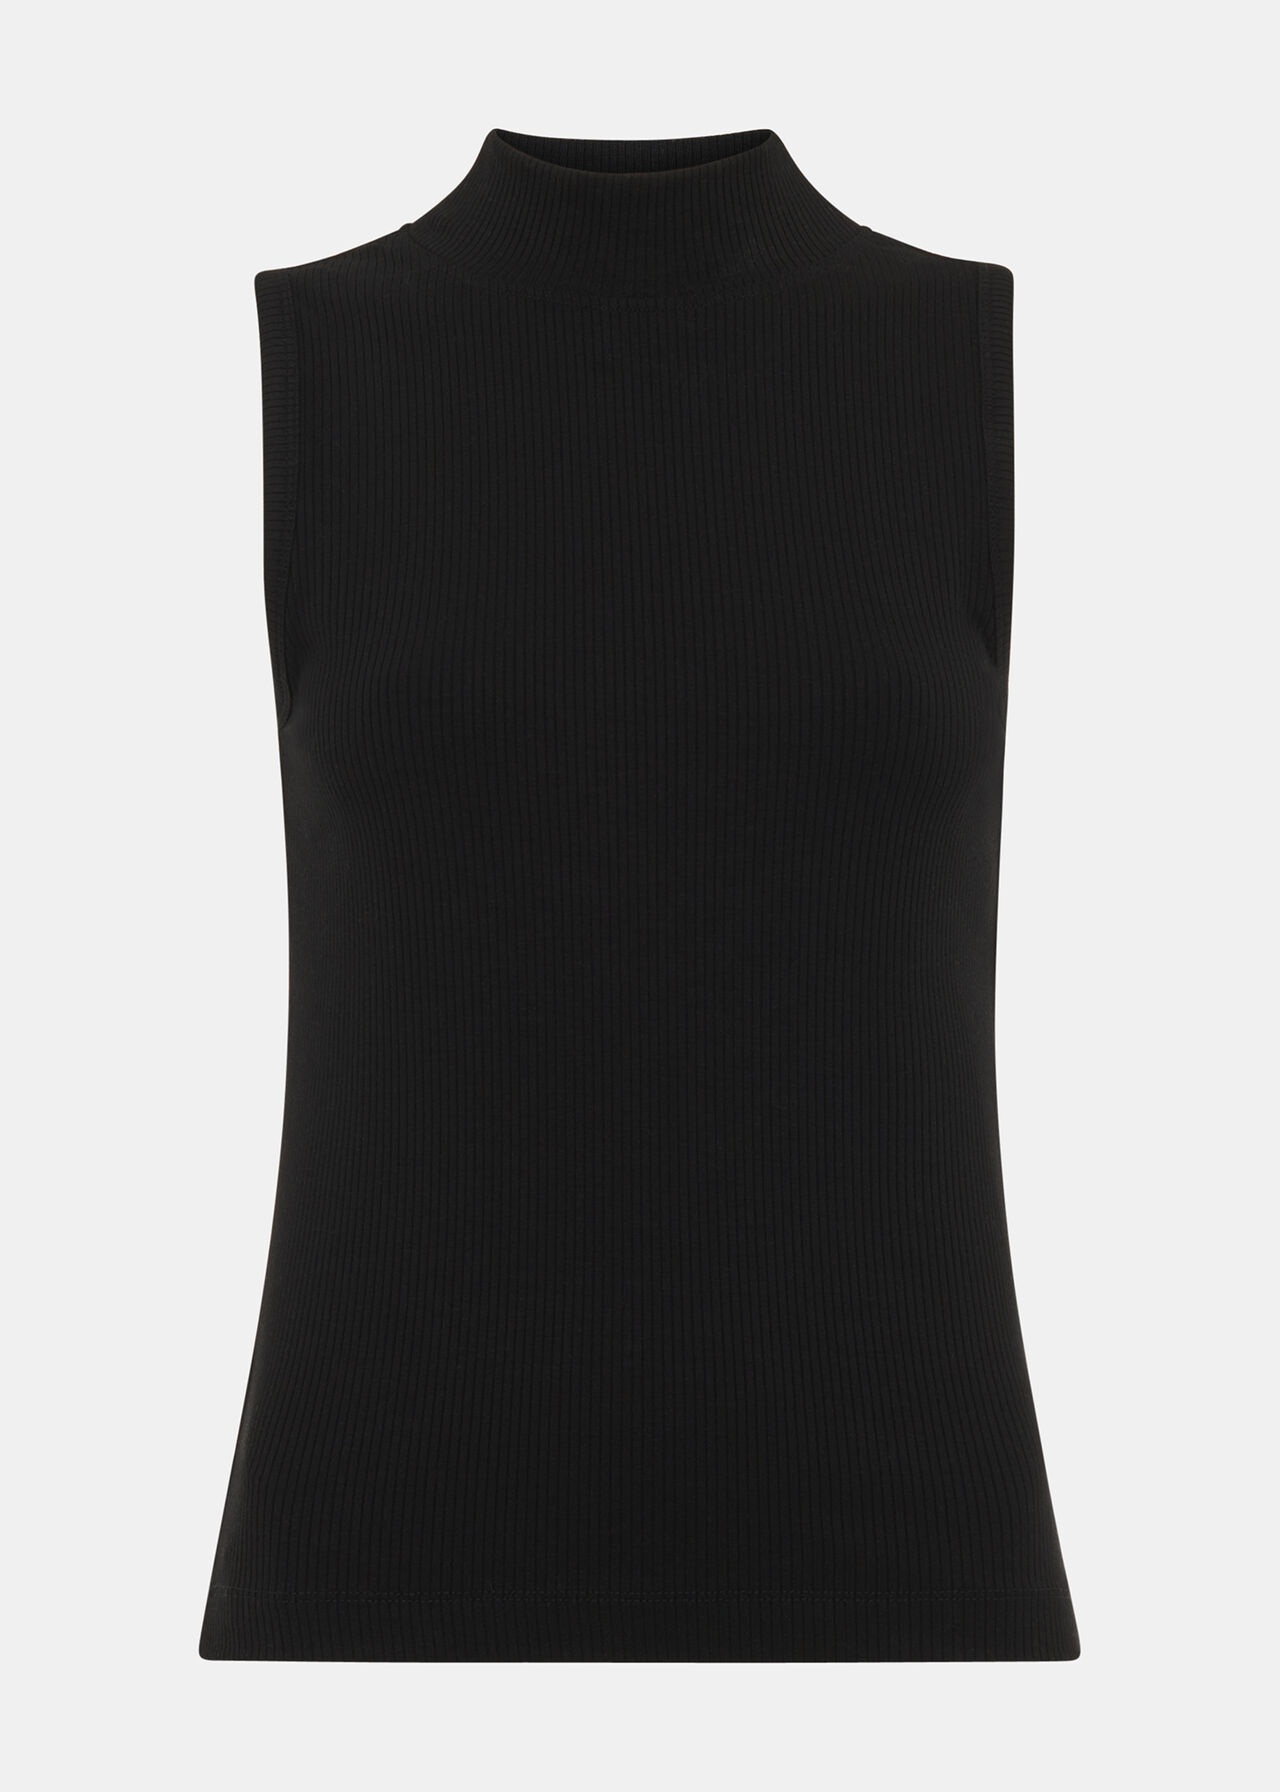 Keyhole Cut Out Top